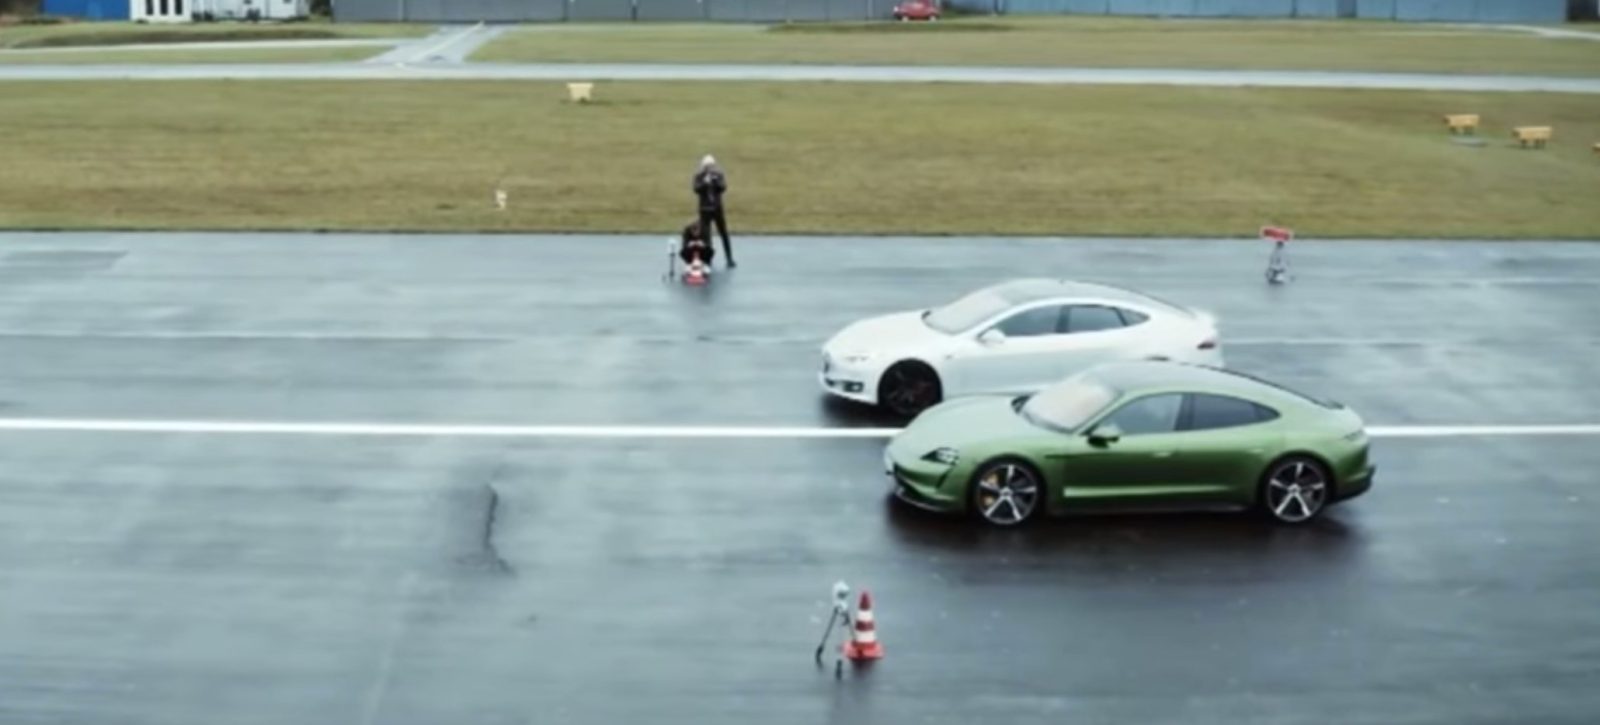 photo of Porsche Taycan beats Tesla Model S in drag race and handling comparison test with caveats image